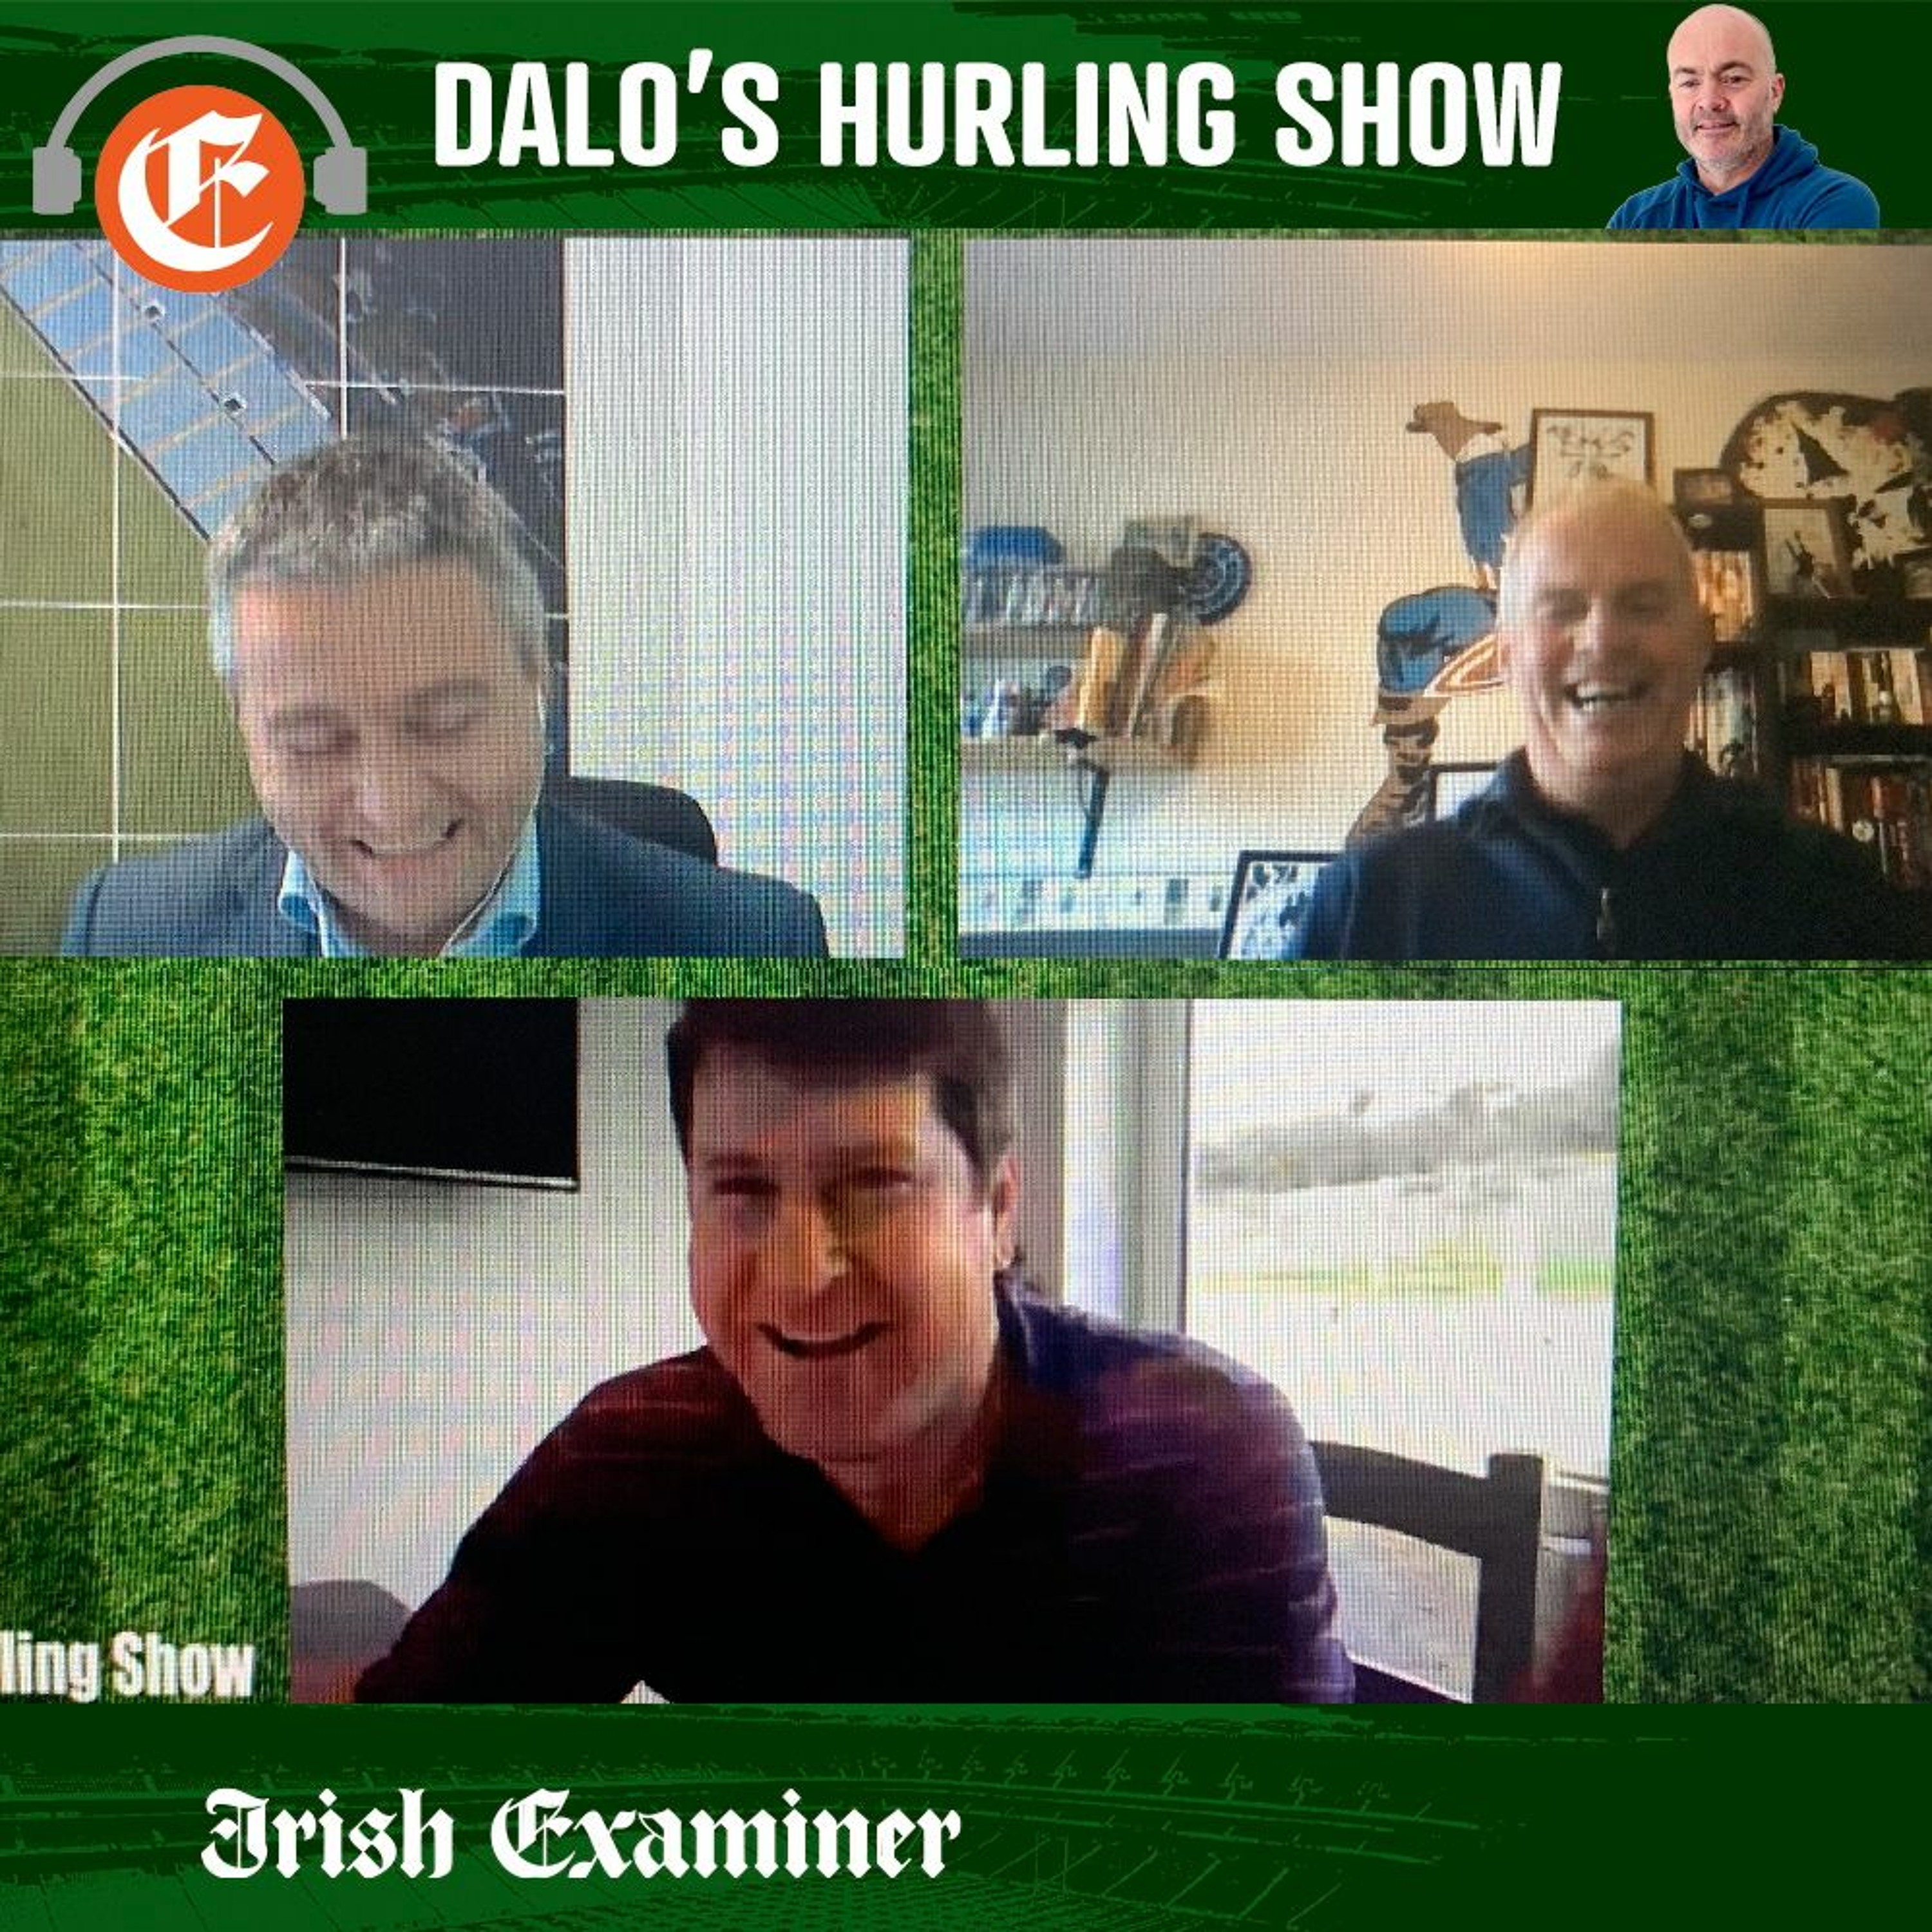 Dalo’s Hurling Show: ’At the end the team photo was a parish photo’